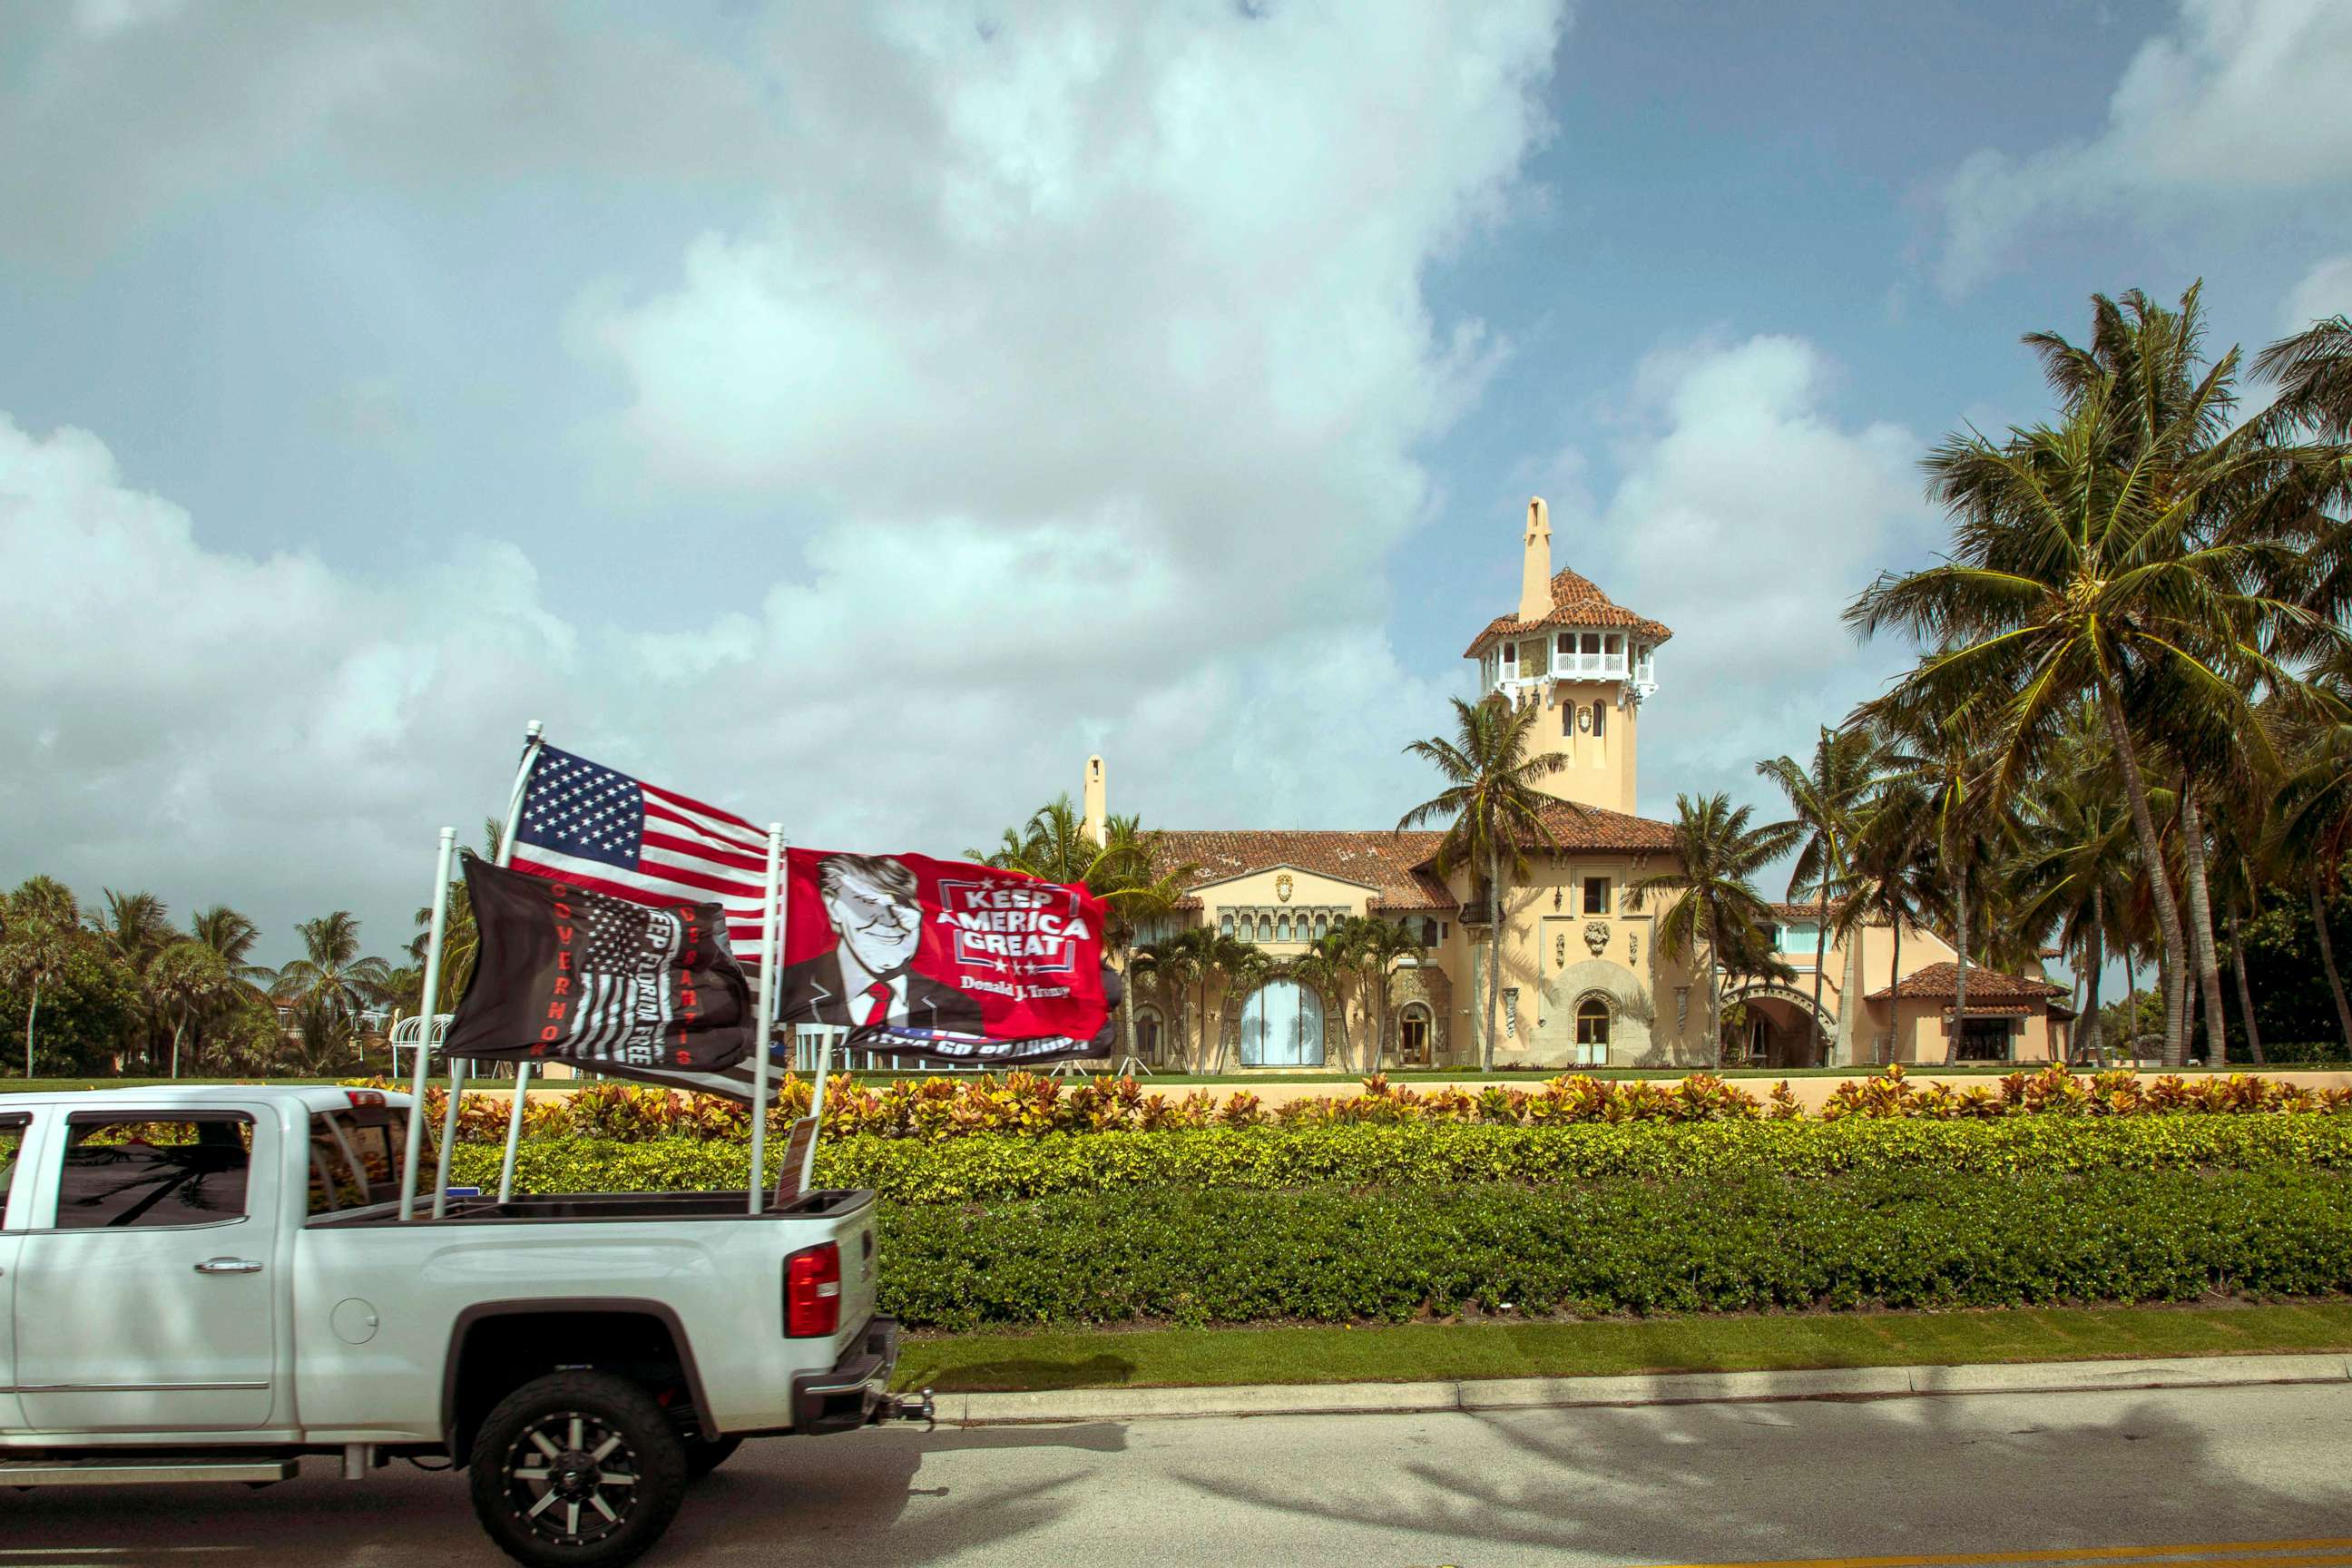 PHOTO: A truck displaying pro-Trump flags is dirven past Mar-a-Lago in Palm Beach, the home of former President Donald Trump, Aug. 9, 2022, one day after FBI agents searched the residence.